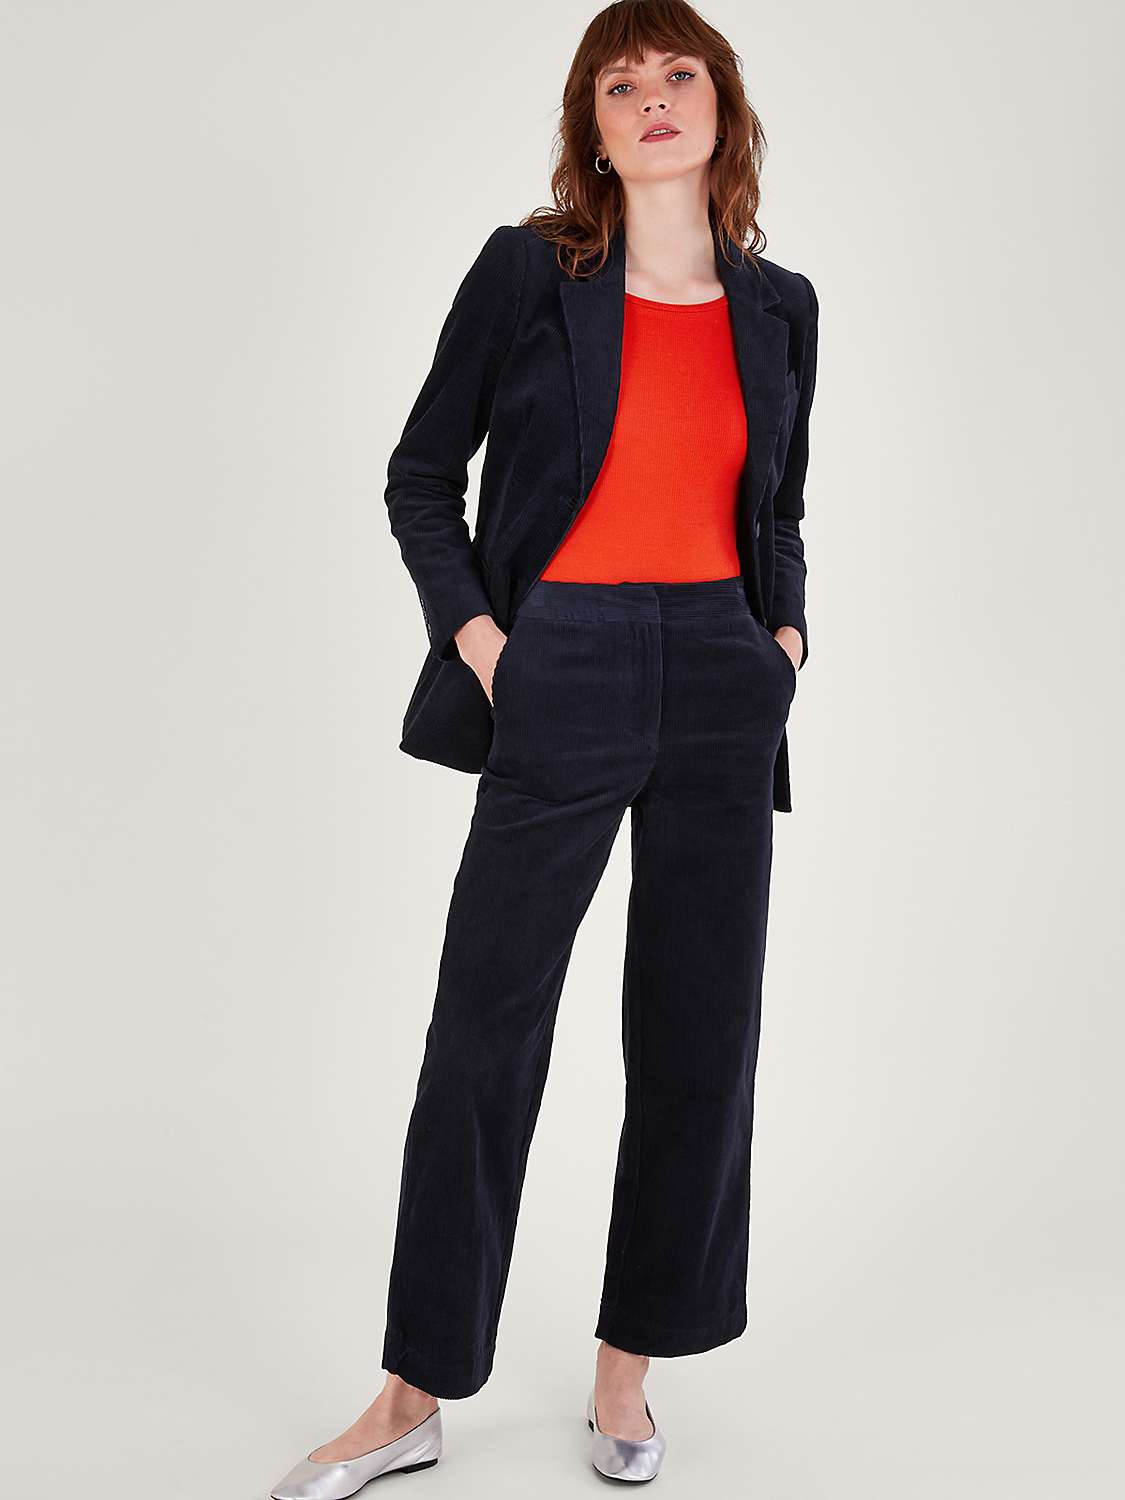 Buy Monsoon Cord Wide Leg Trousers Online at johnlewis.com